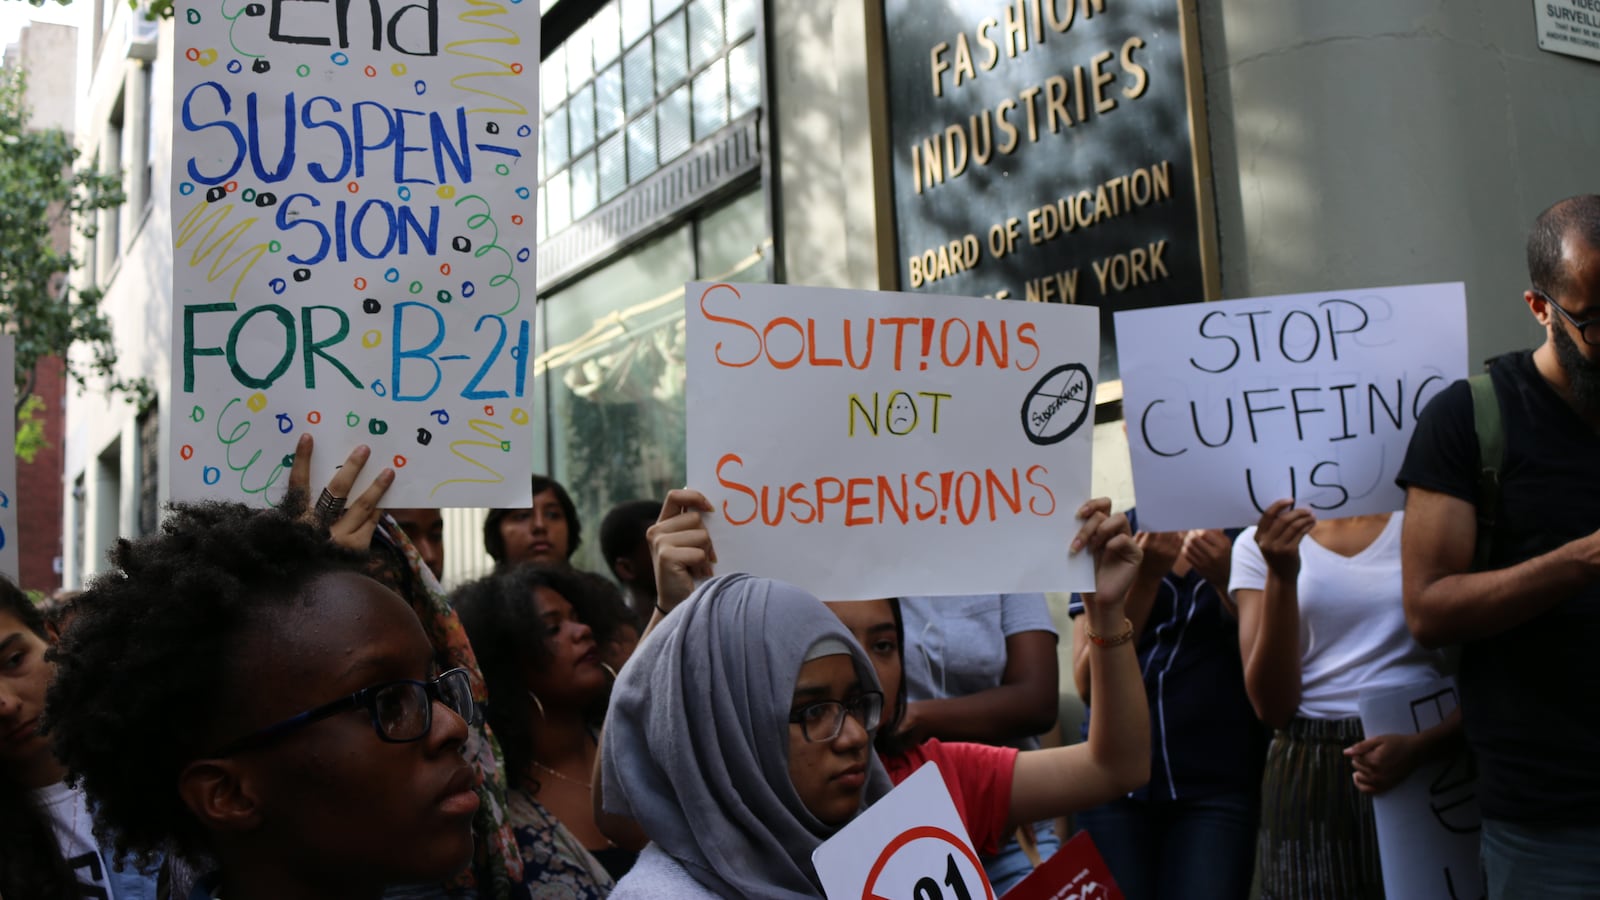 Advocates protested the city's suspension policy.